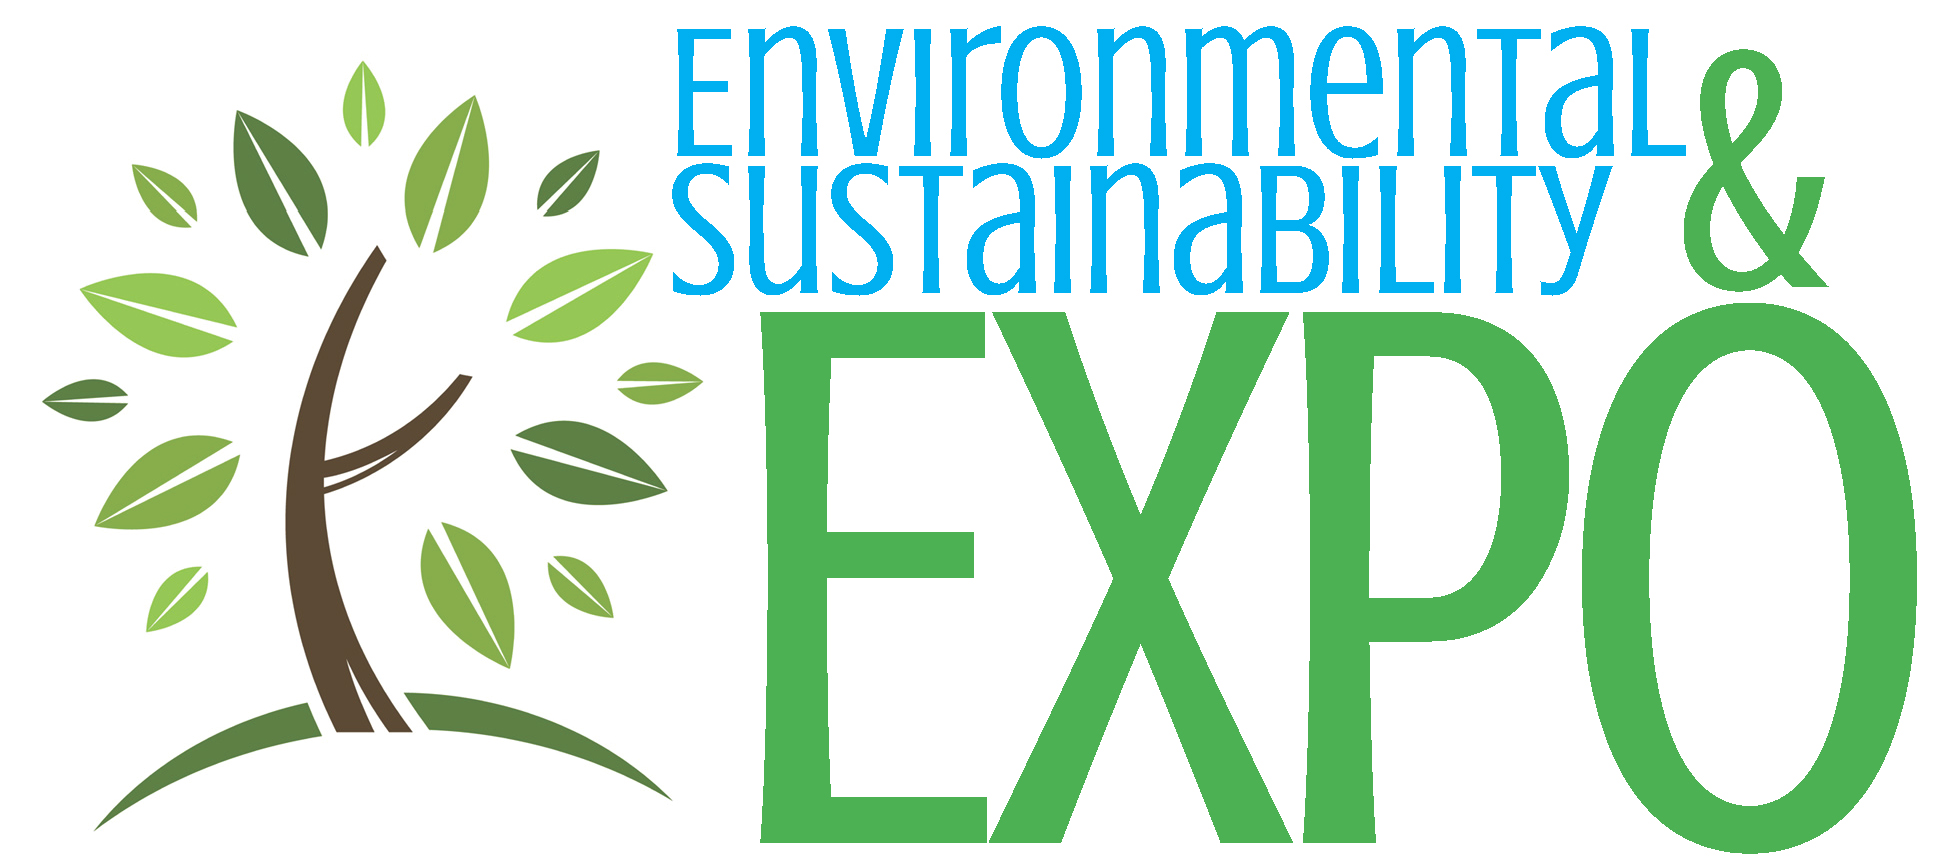 Cal State San Bernardino’s Palm Desert Campus will host its 10th annual Environmental and Sustainability Expo on Friday, May 3.